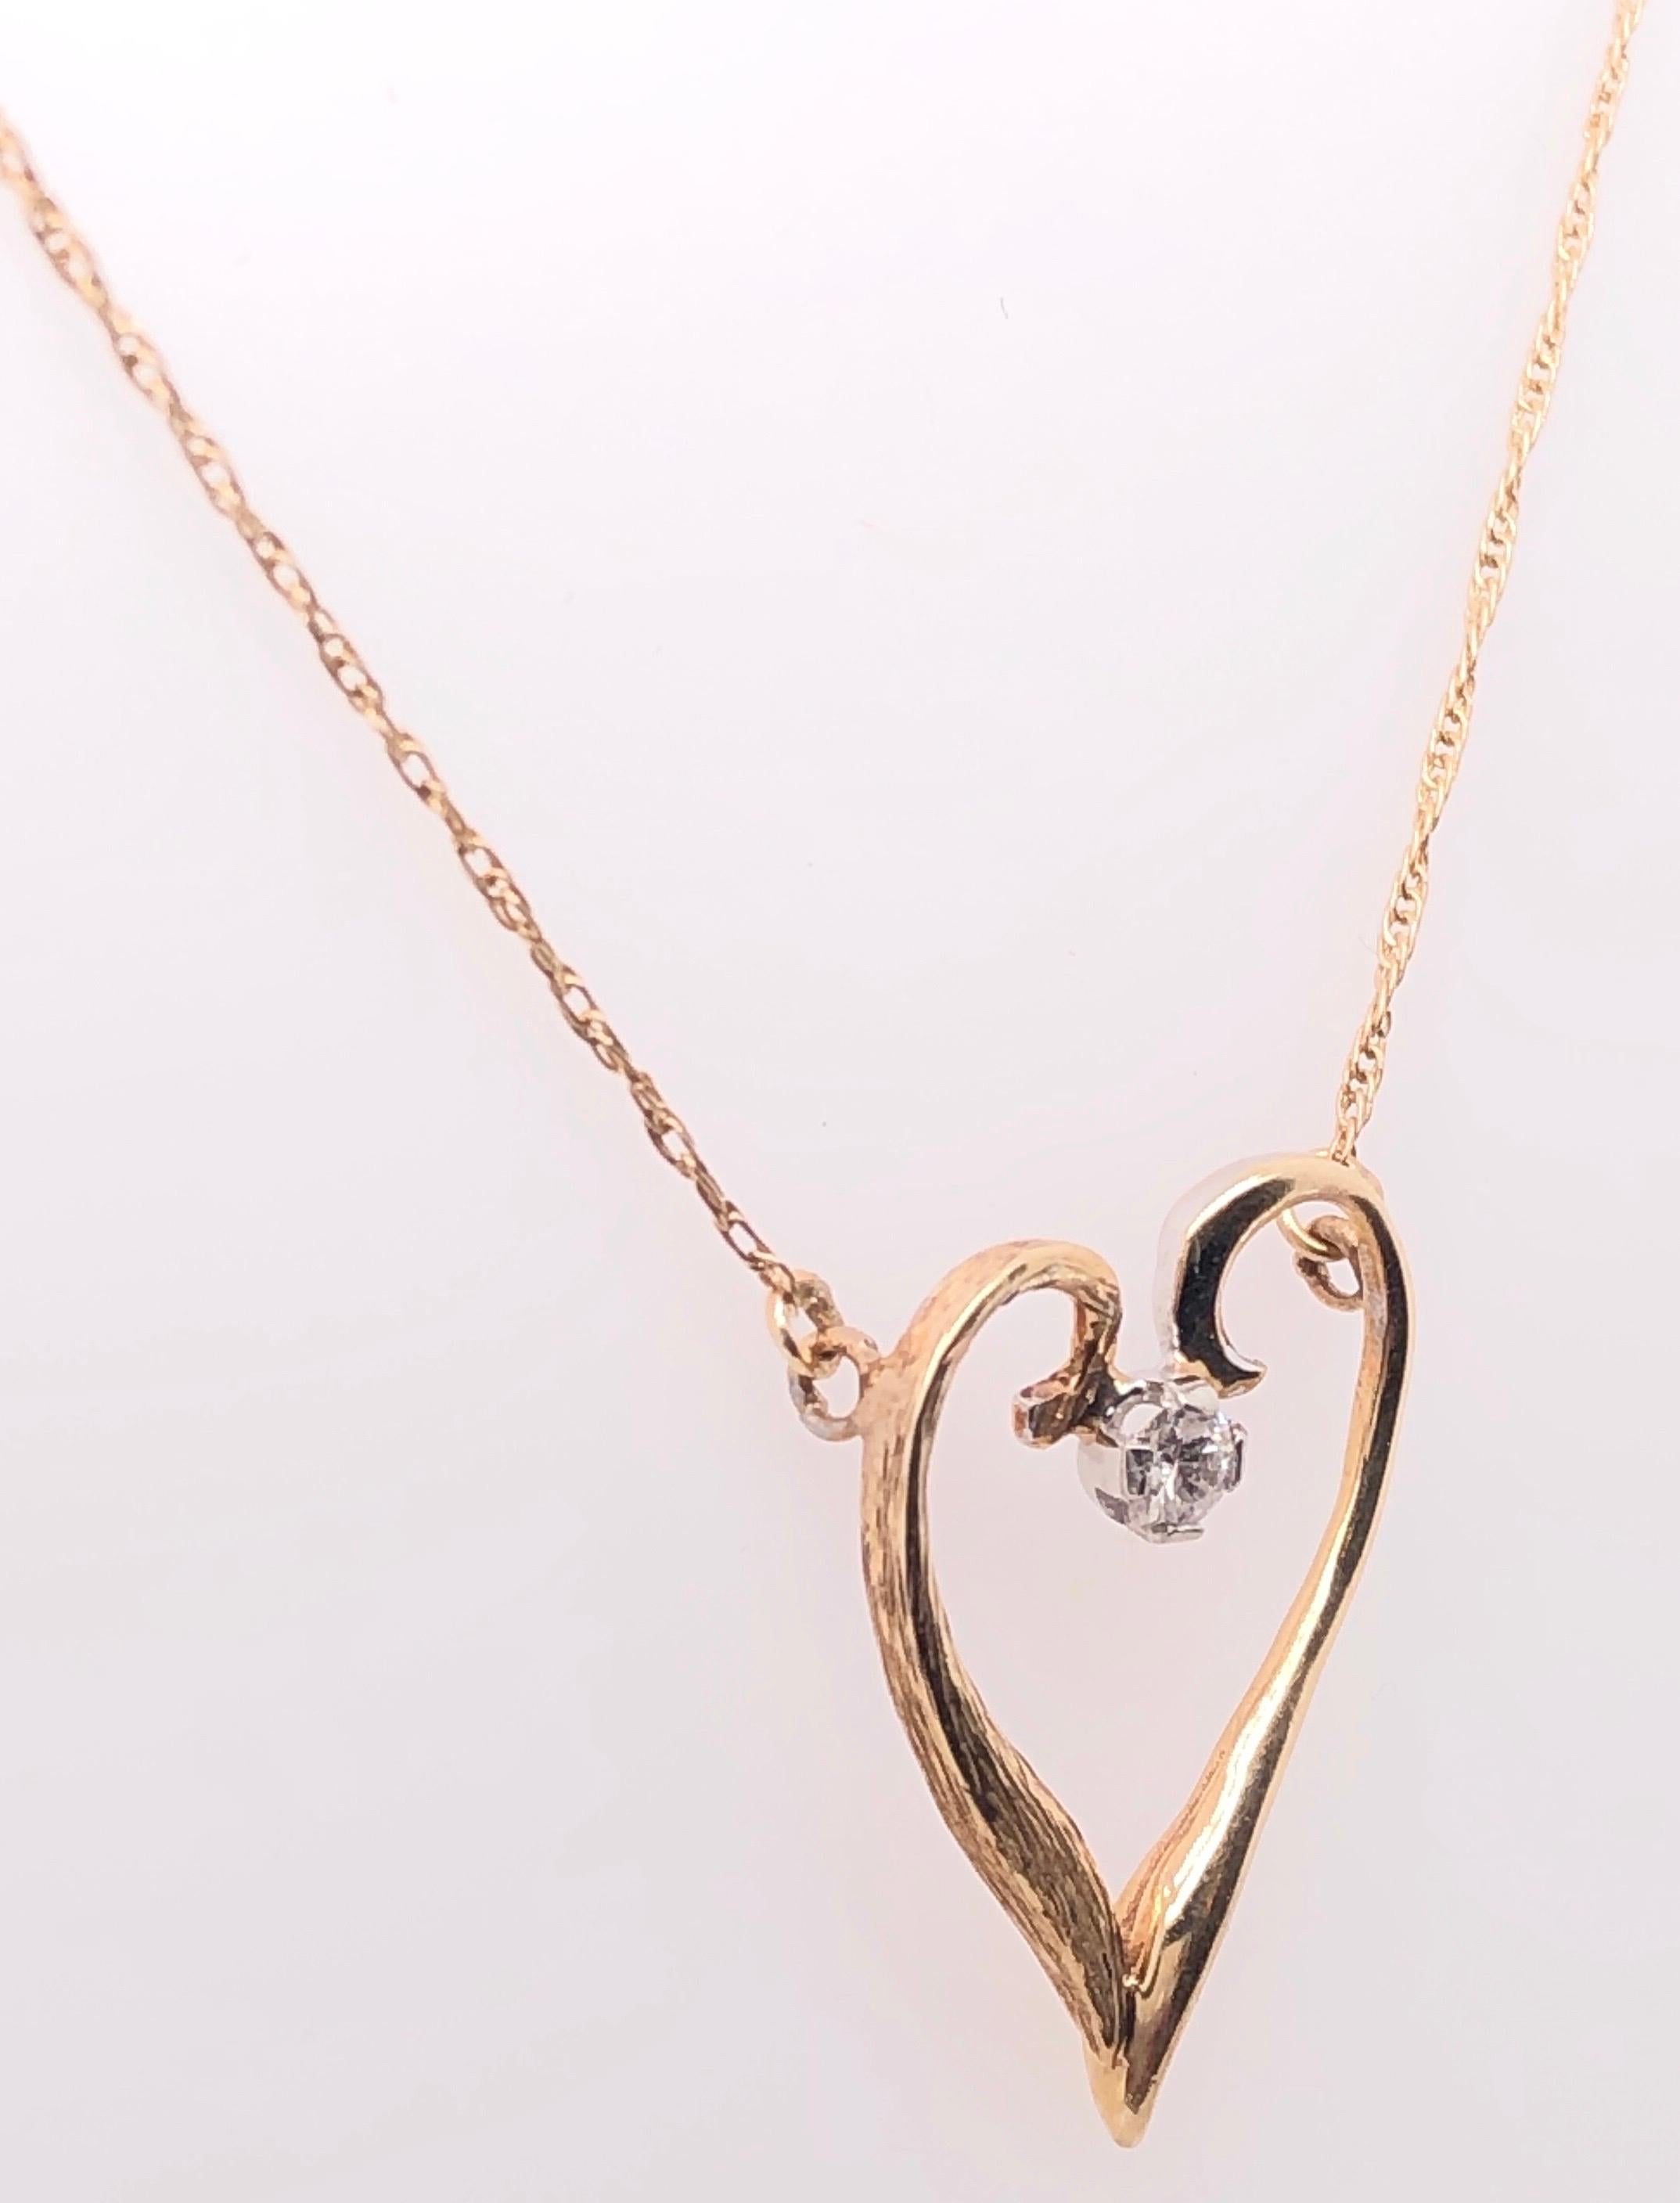 Modern 14 Karat Yellow Gold Heart Soldered Pendant with Center Diamond Necklace For Sale